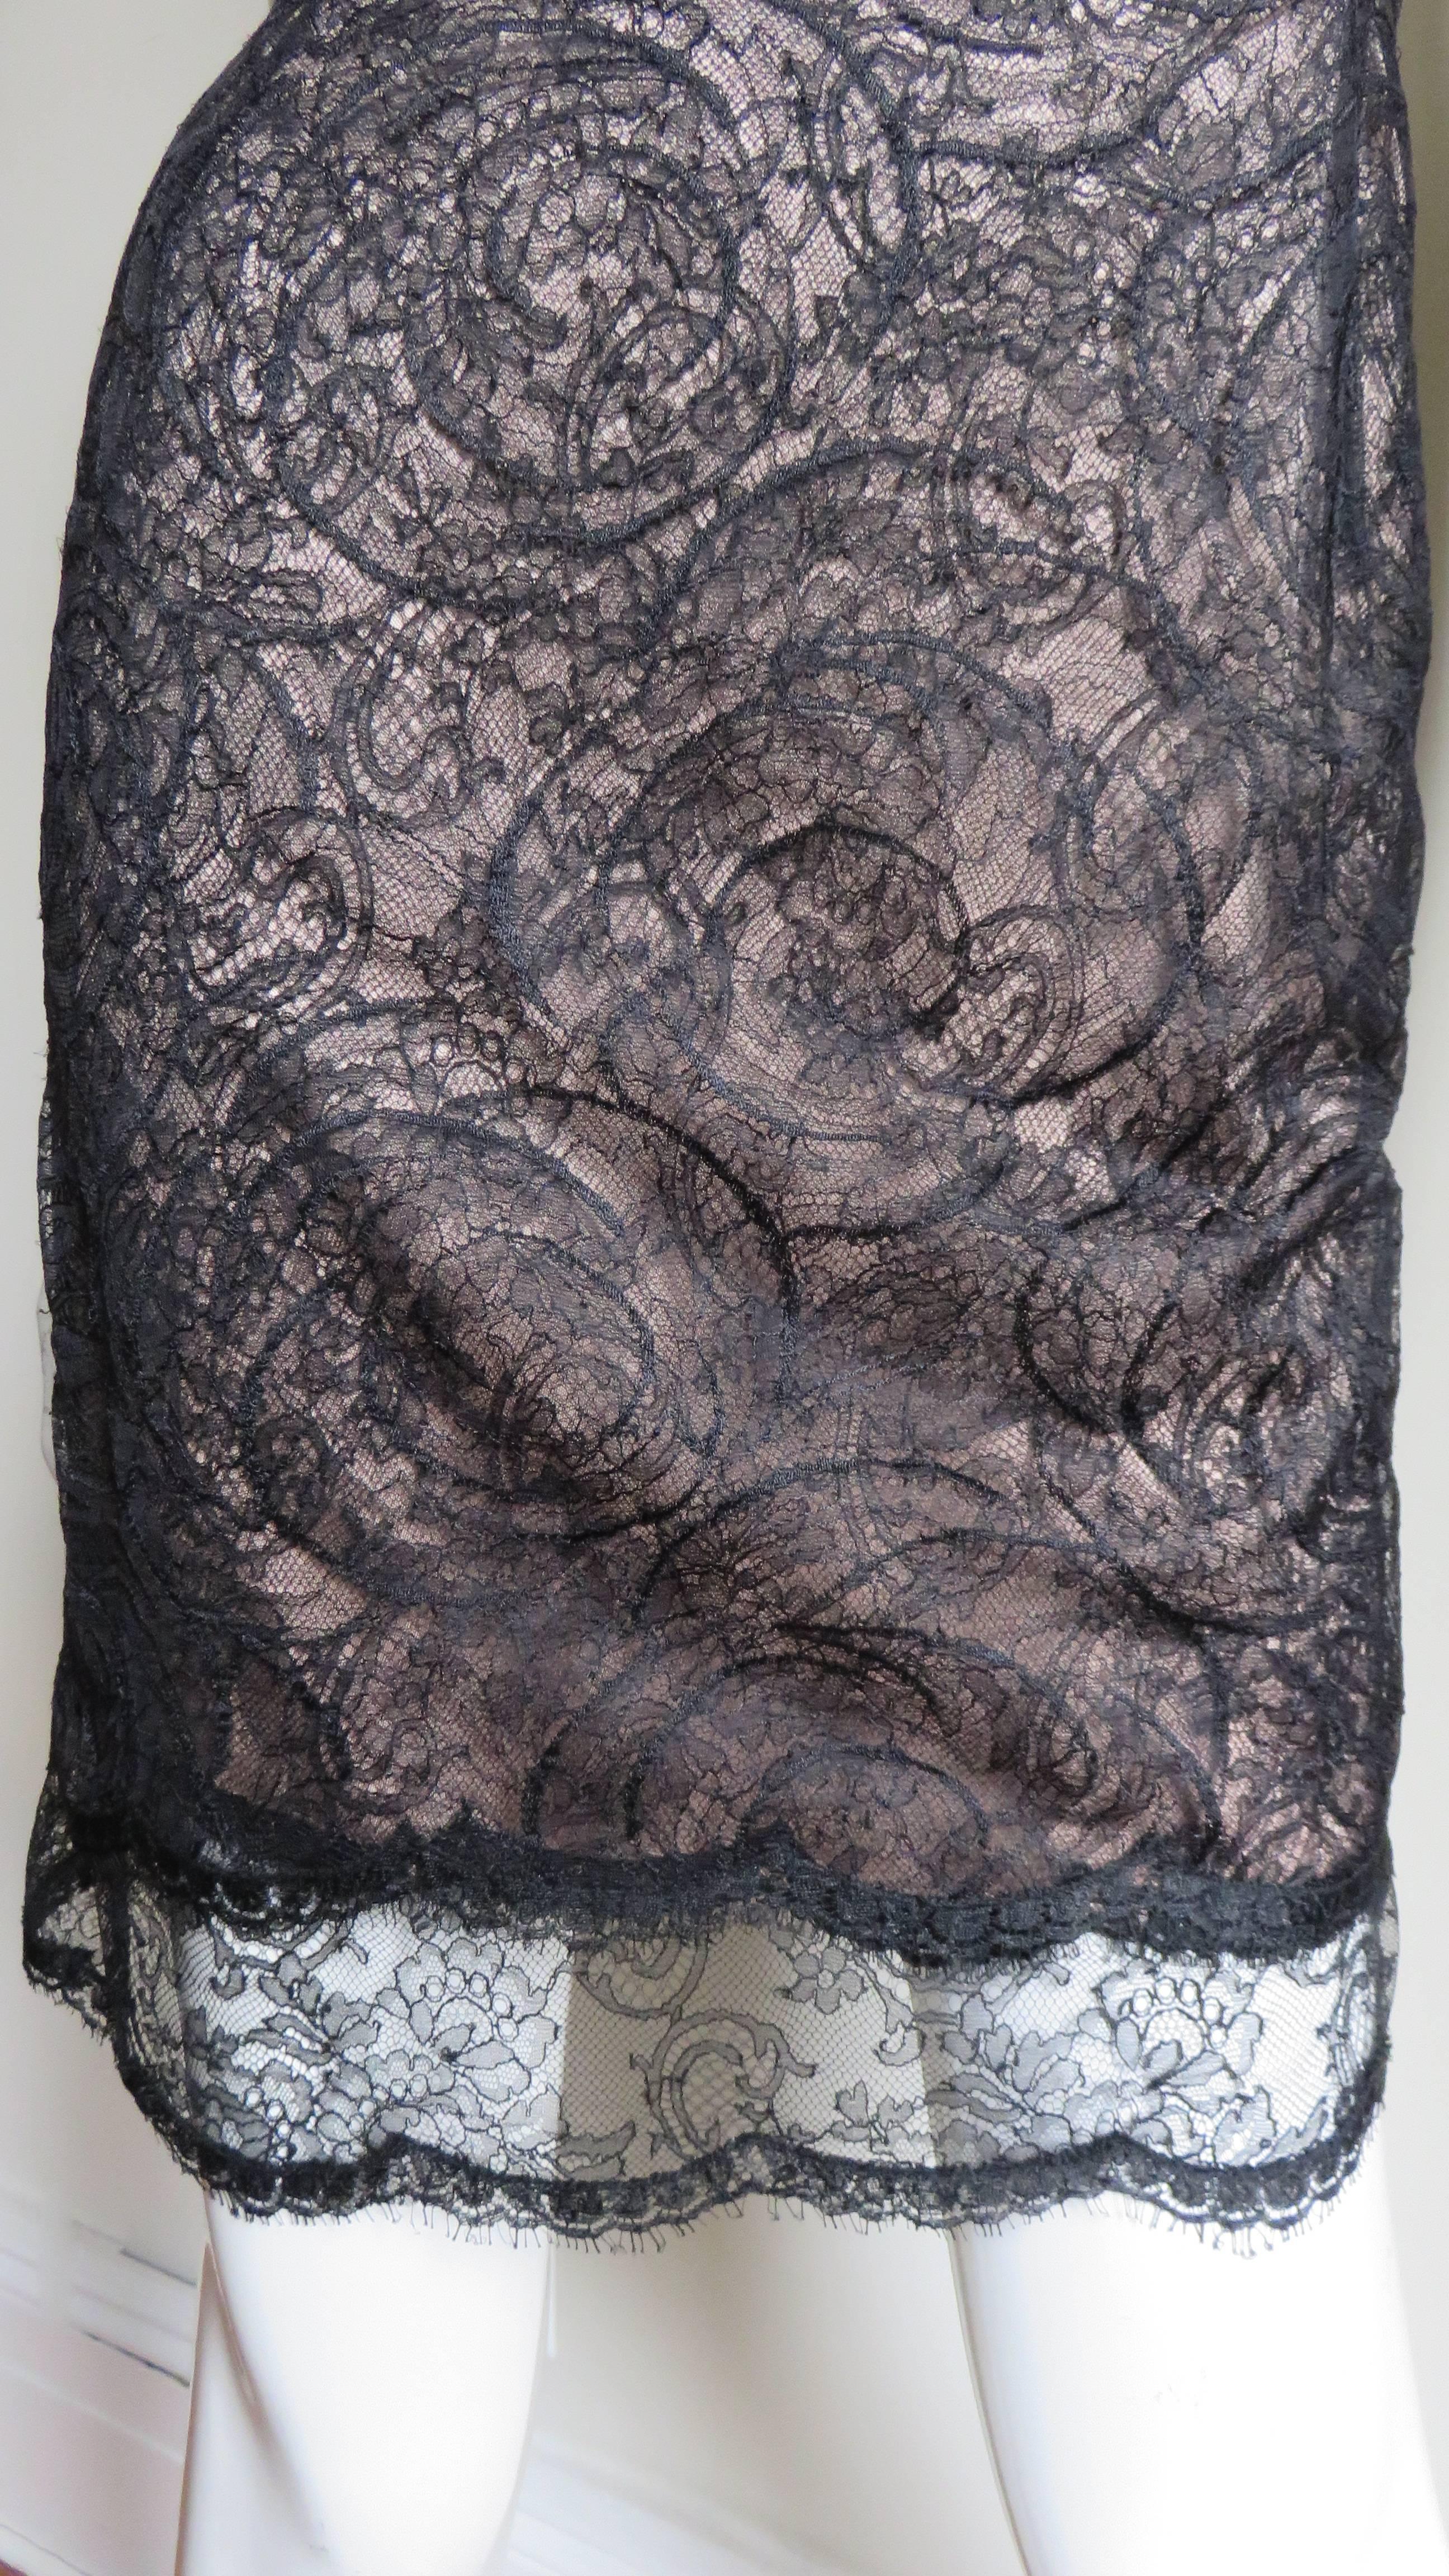  Geoffrey Beene Silk Lace Slip Dress 1980s In Good Condition For Sale In Water Mill, NY